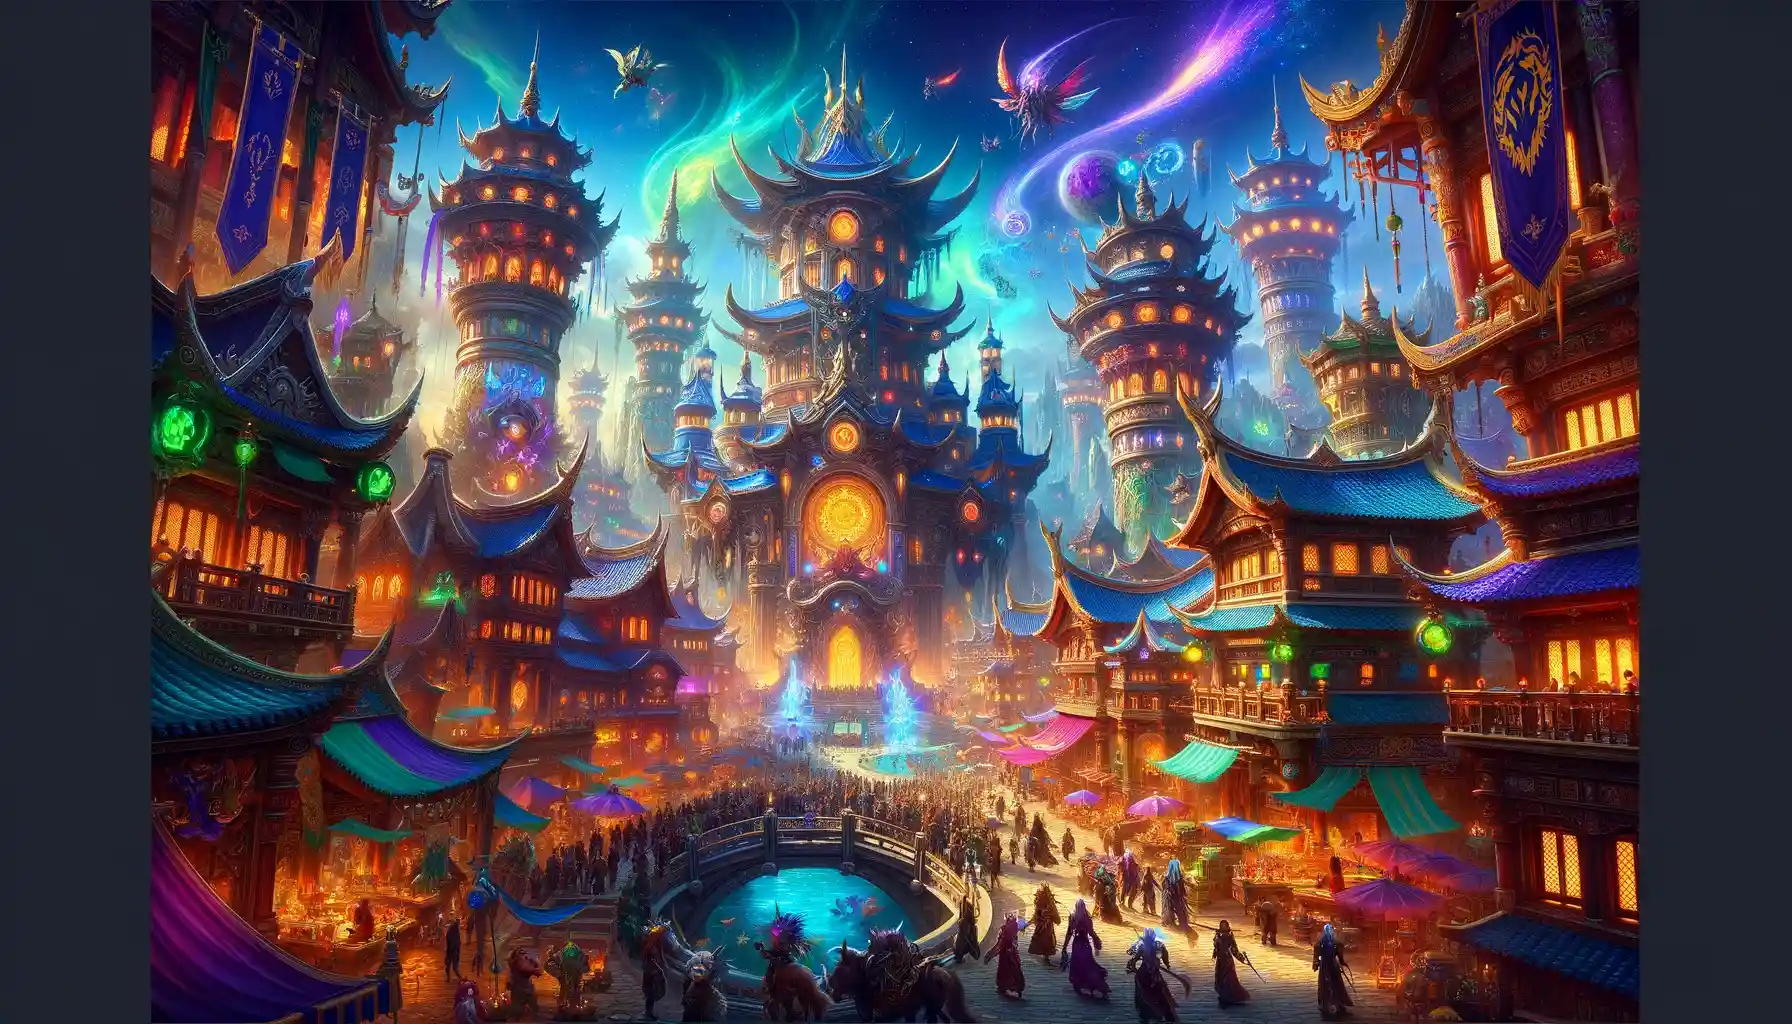 The Epic Return Of World Of Warcraft To China: Everything You Need To Know!